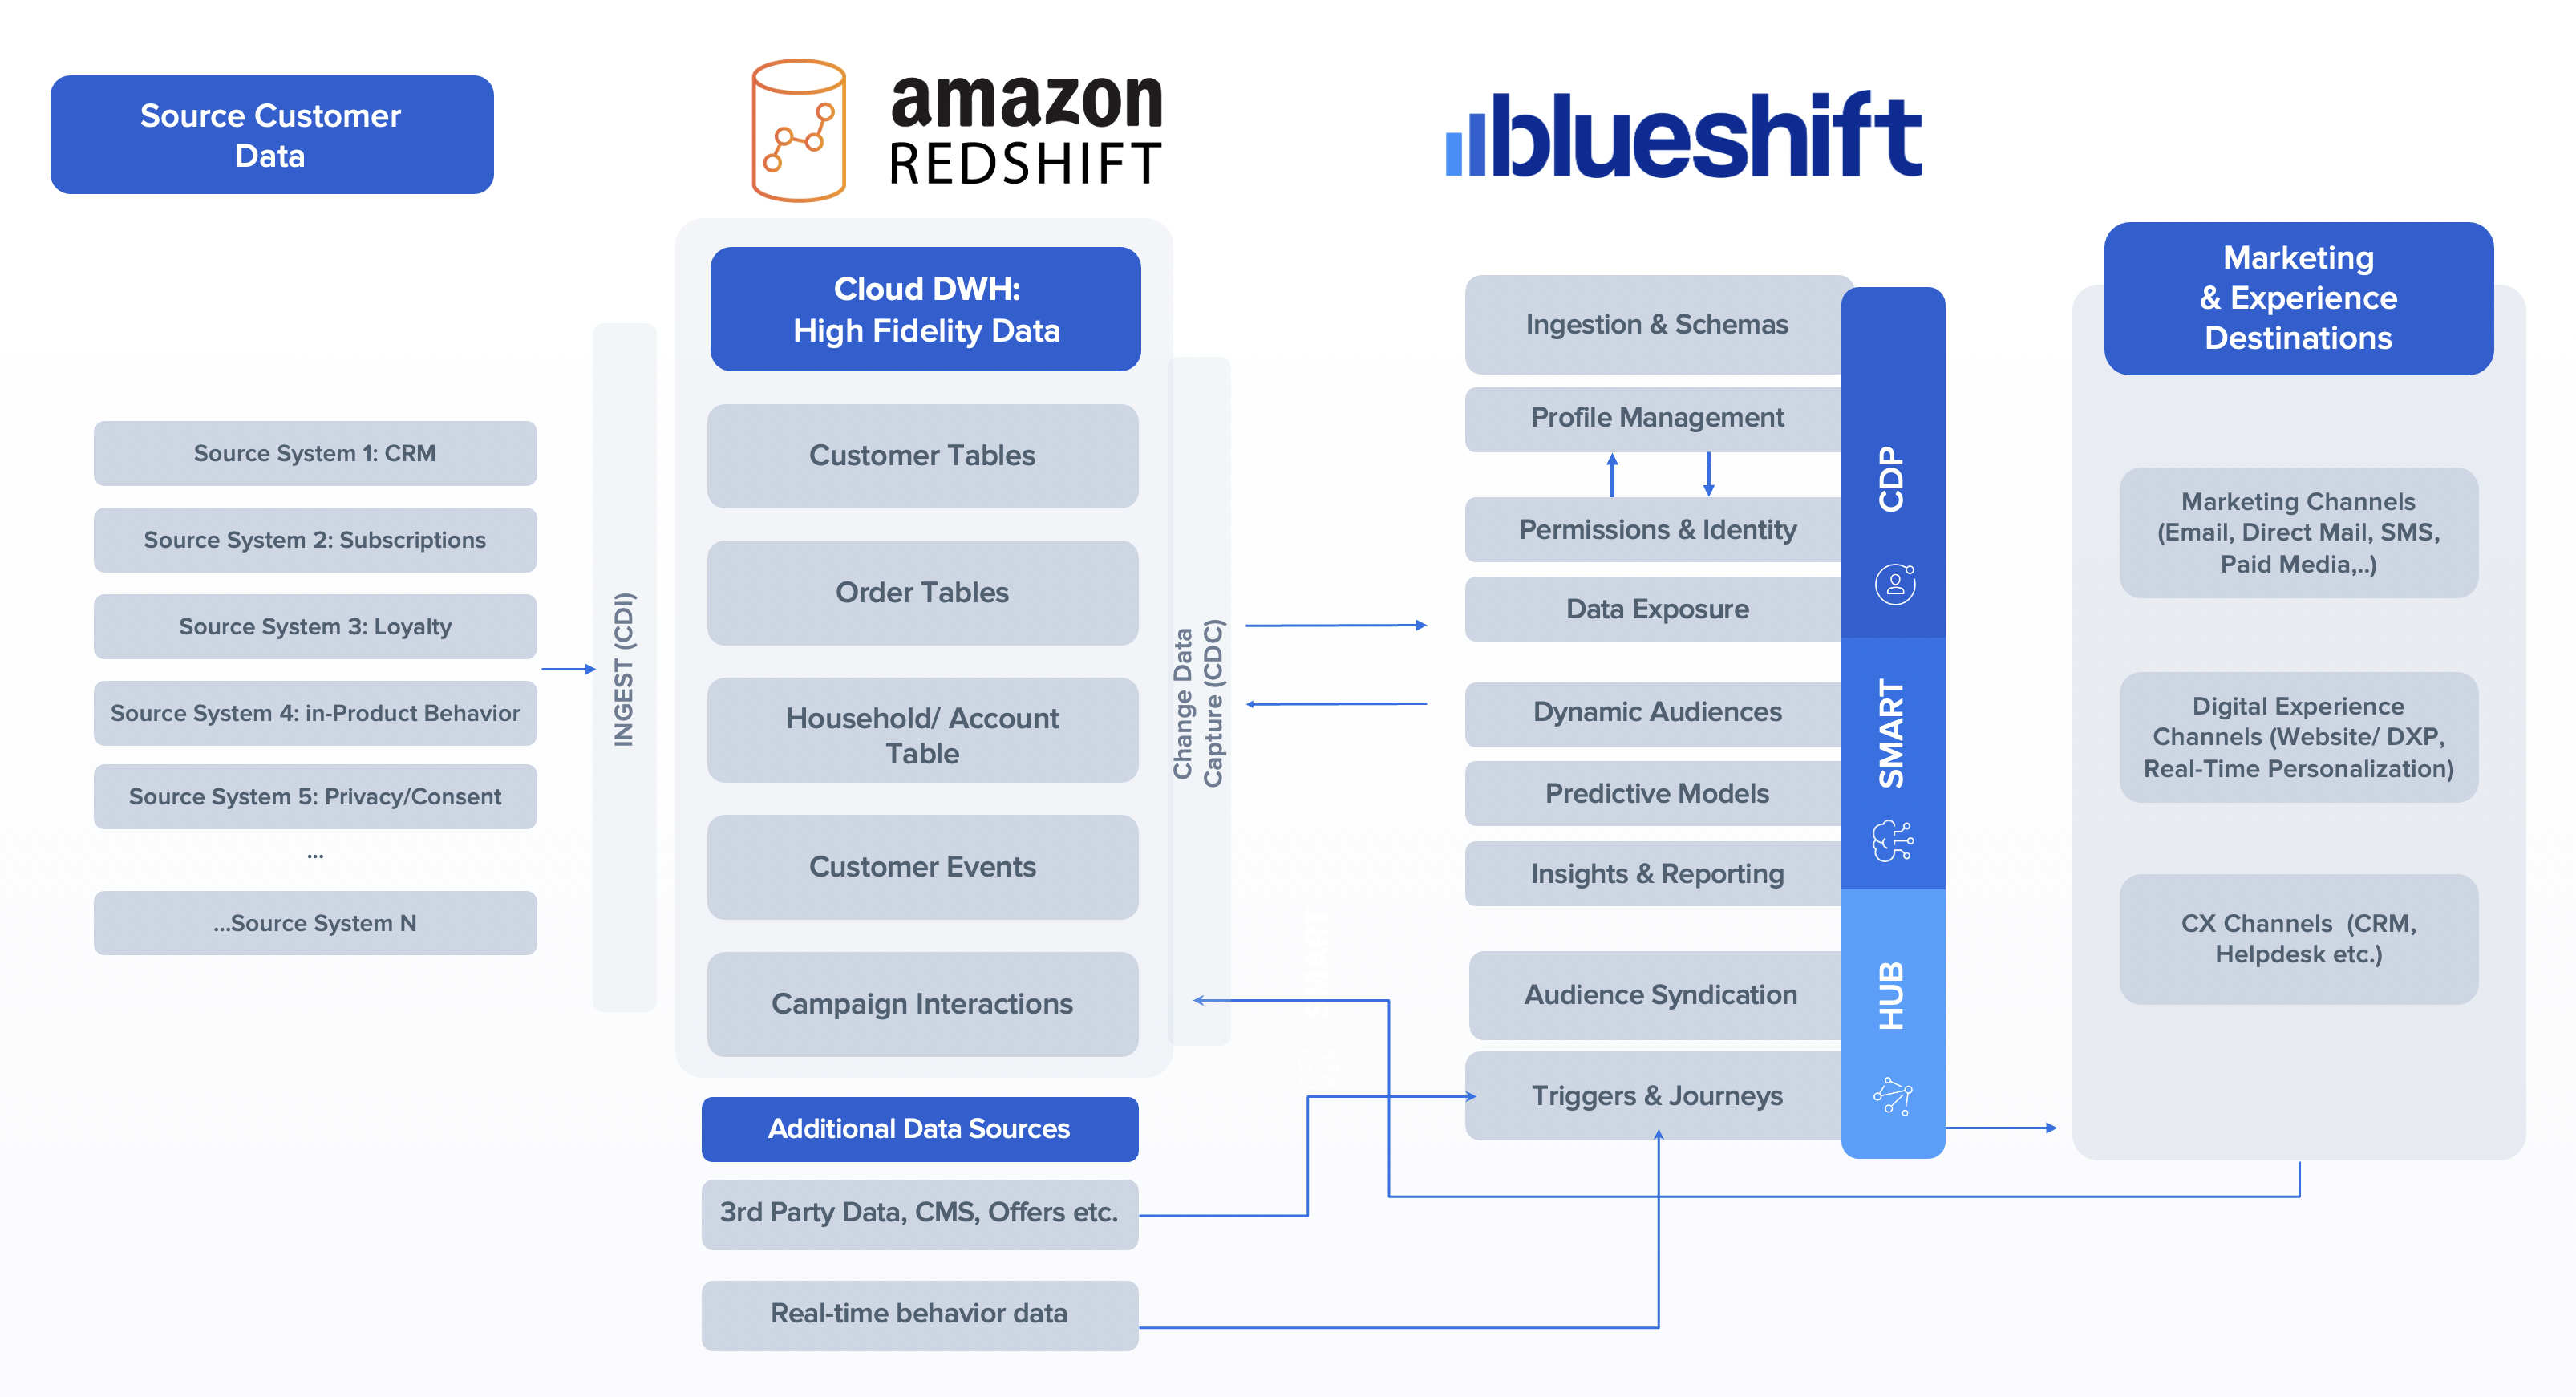 shows how the various components of the CDP environment and Amazon Redshift integrate to provide the the end-to-end solution